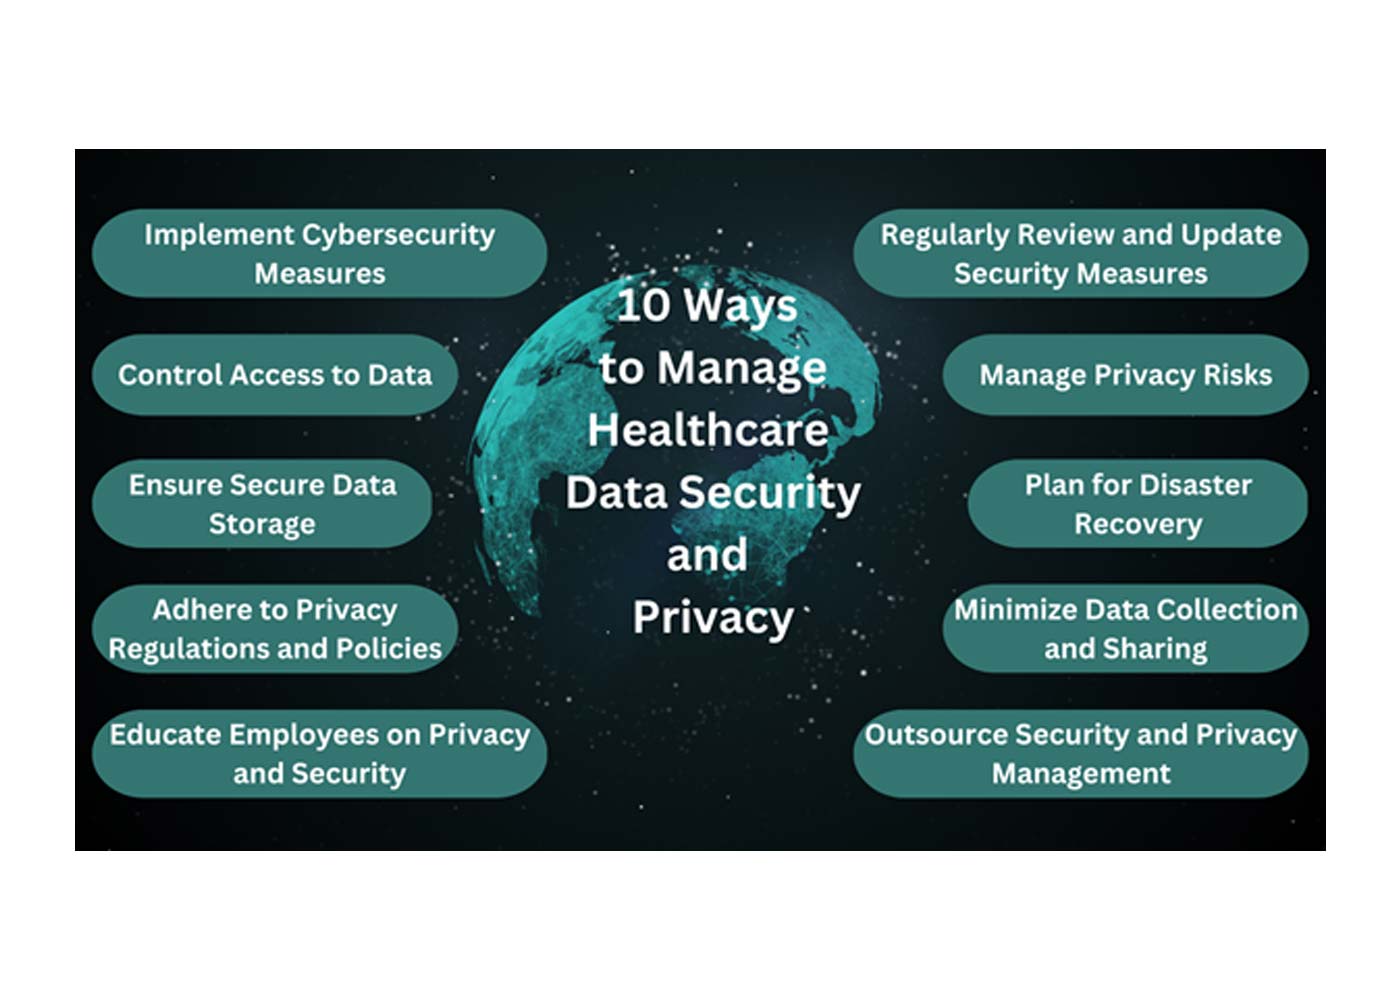 10 Ways to Effectively Manage Healthcare Data Security and Privacy